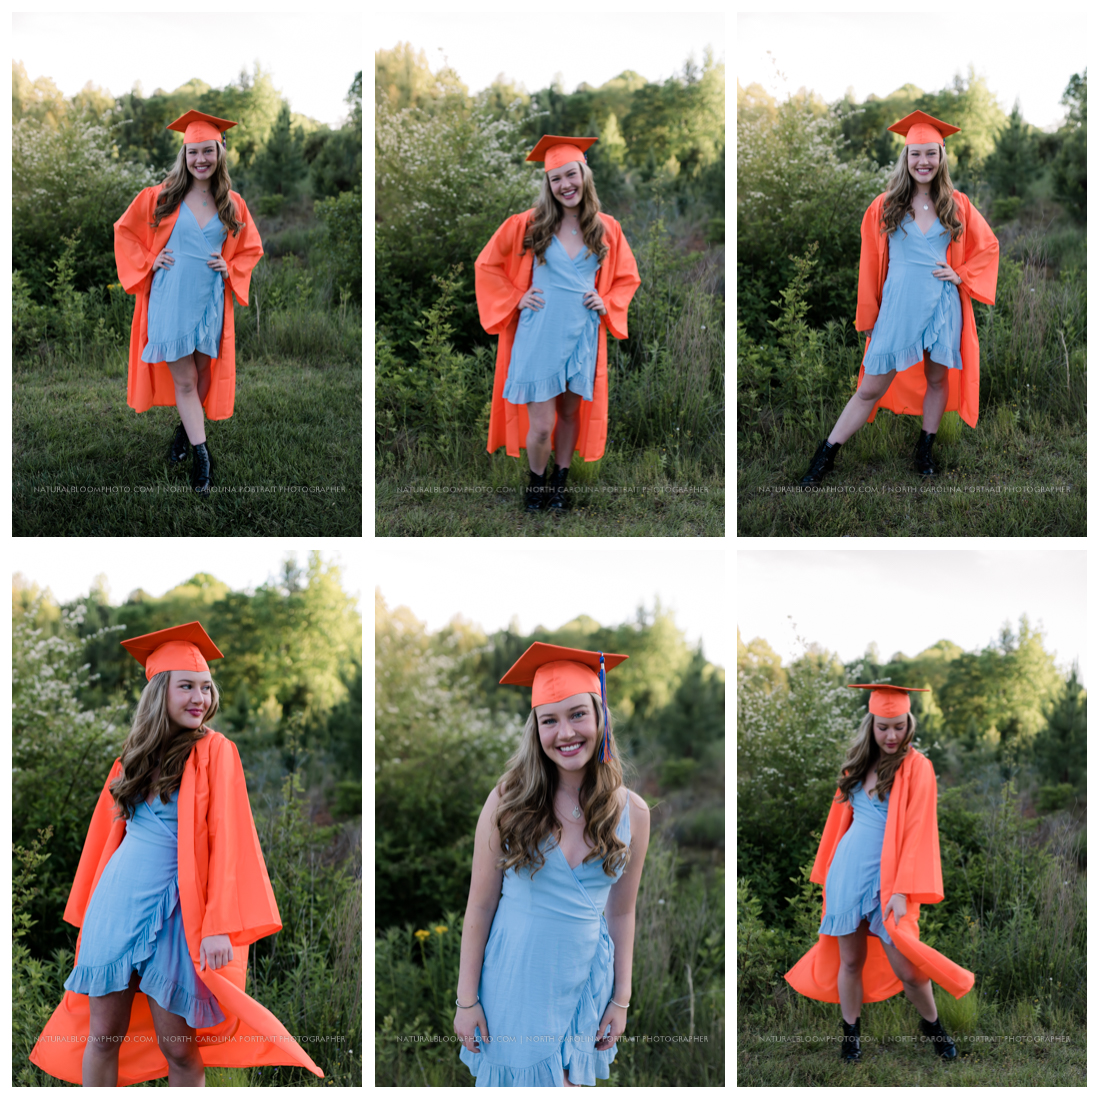 Marvin Ridge cap and gown graduation photos by professional photographer Natural Bloom Photo
